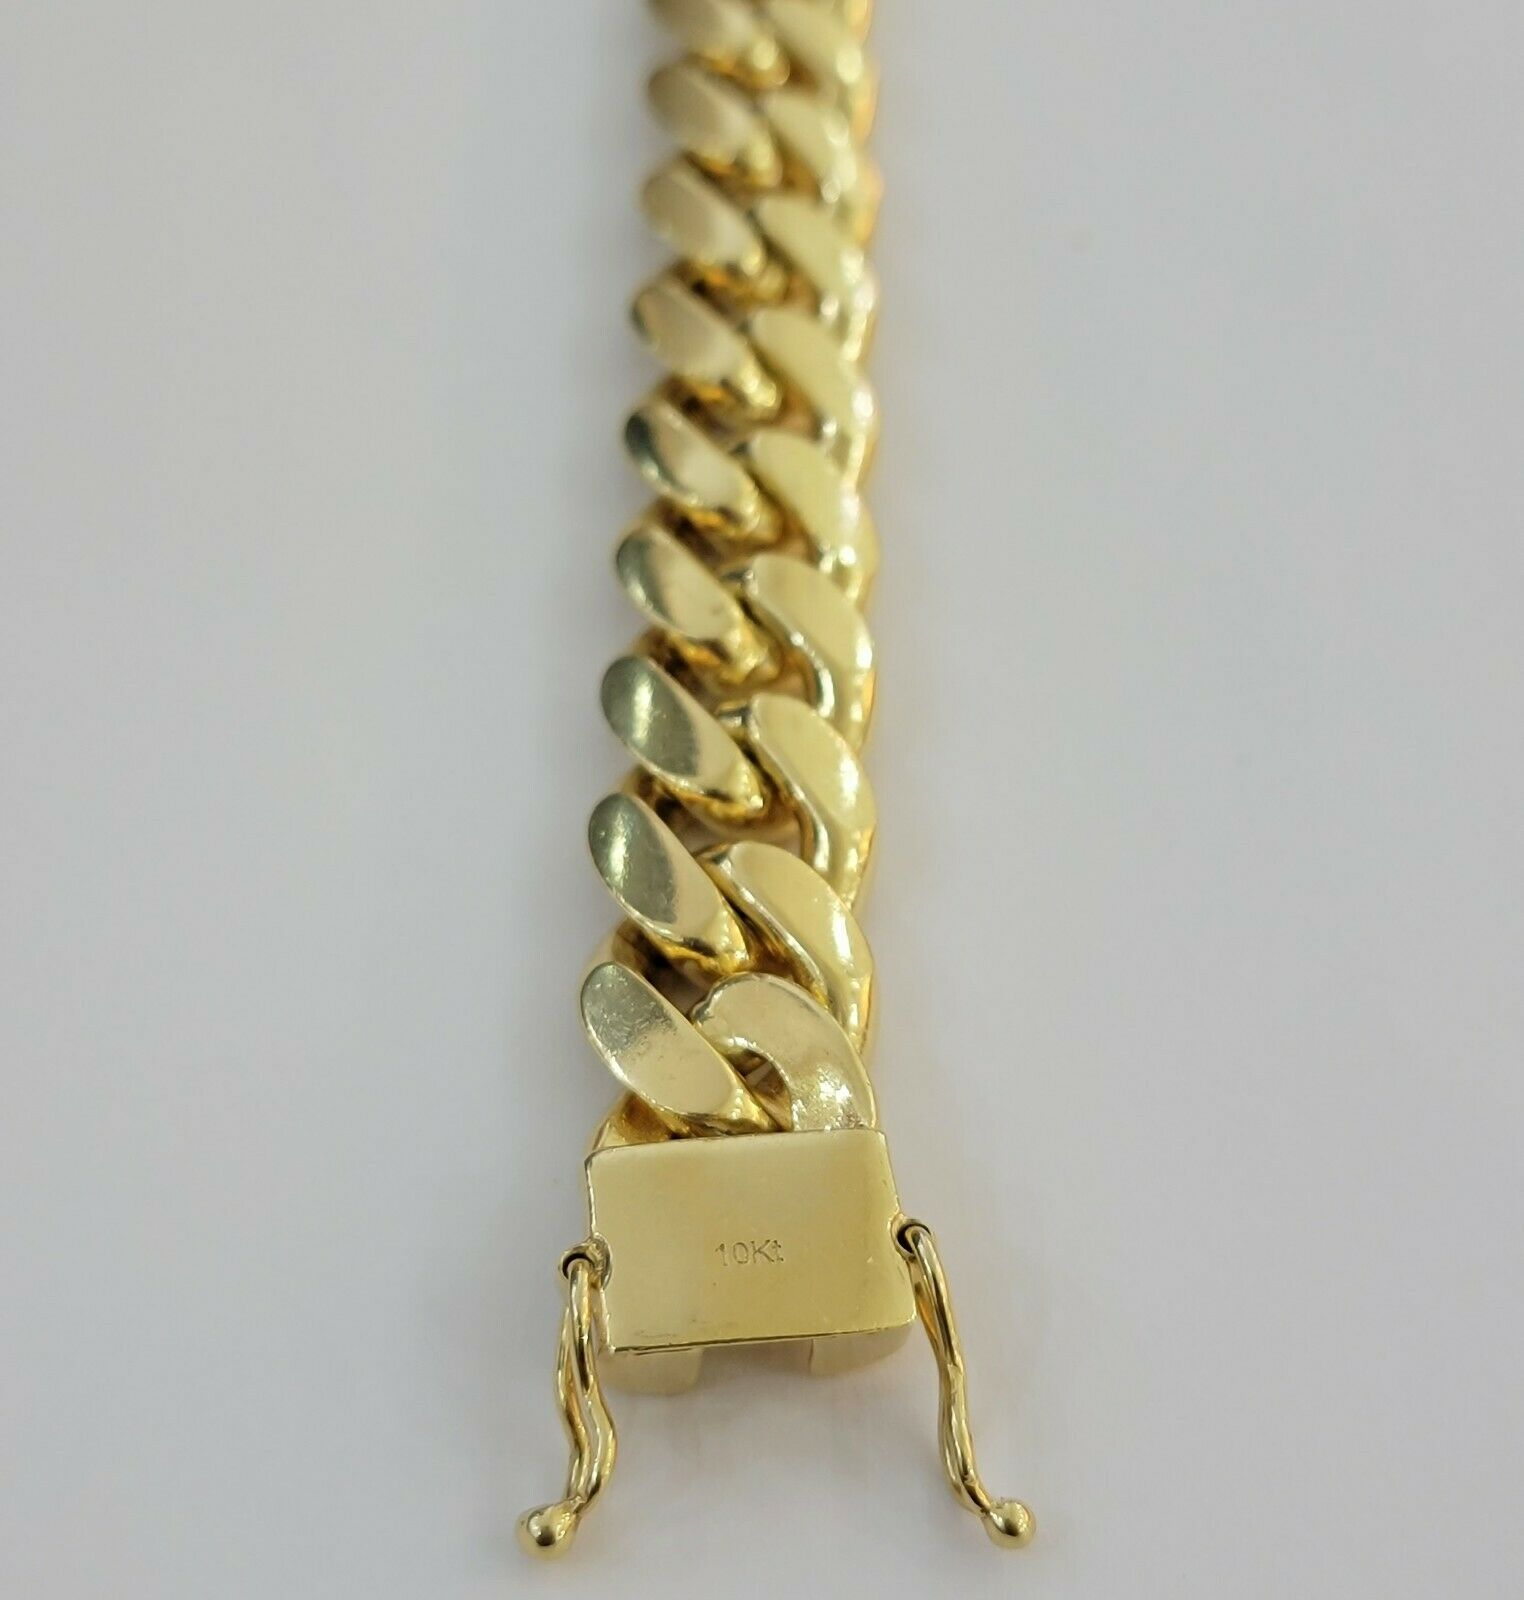 Real 10k Gold Miami Cuban Link Bracelet Solid Mens 13mm 10kt Yellow Gold 9